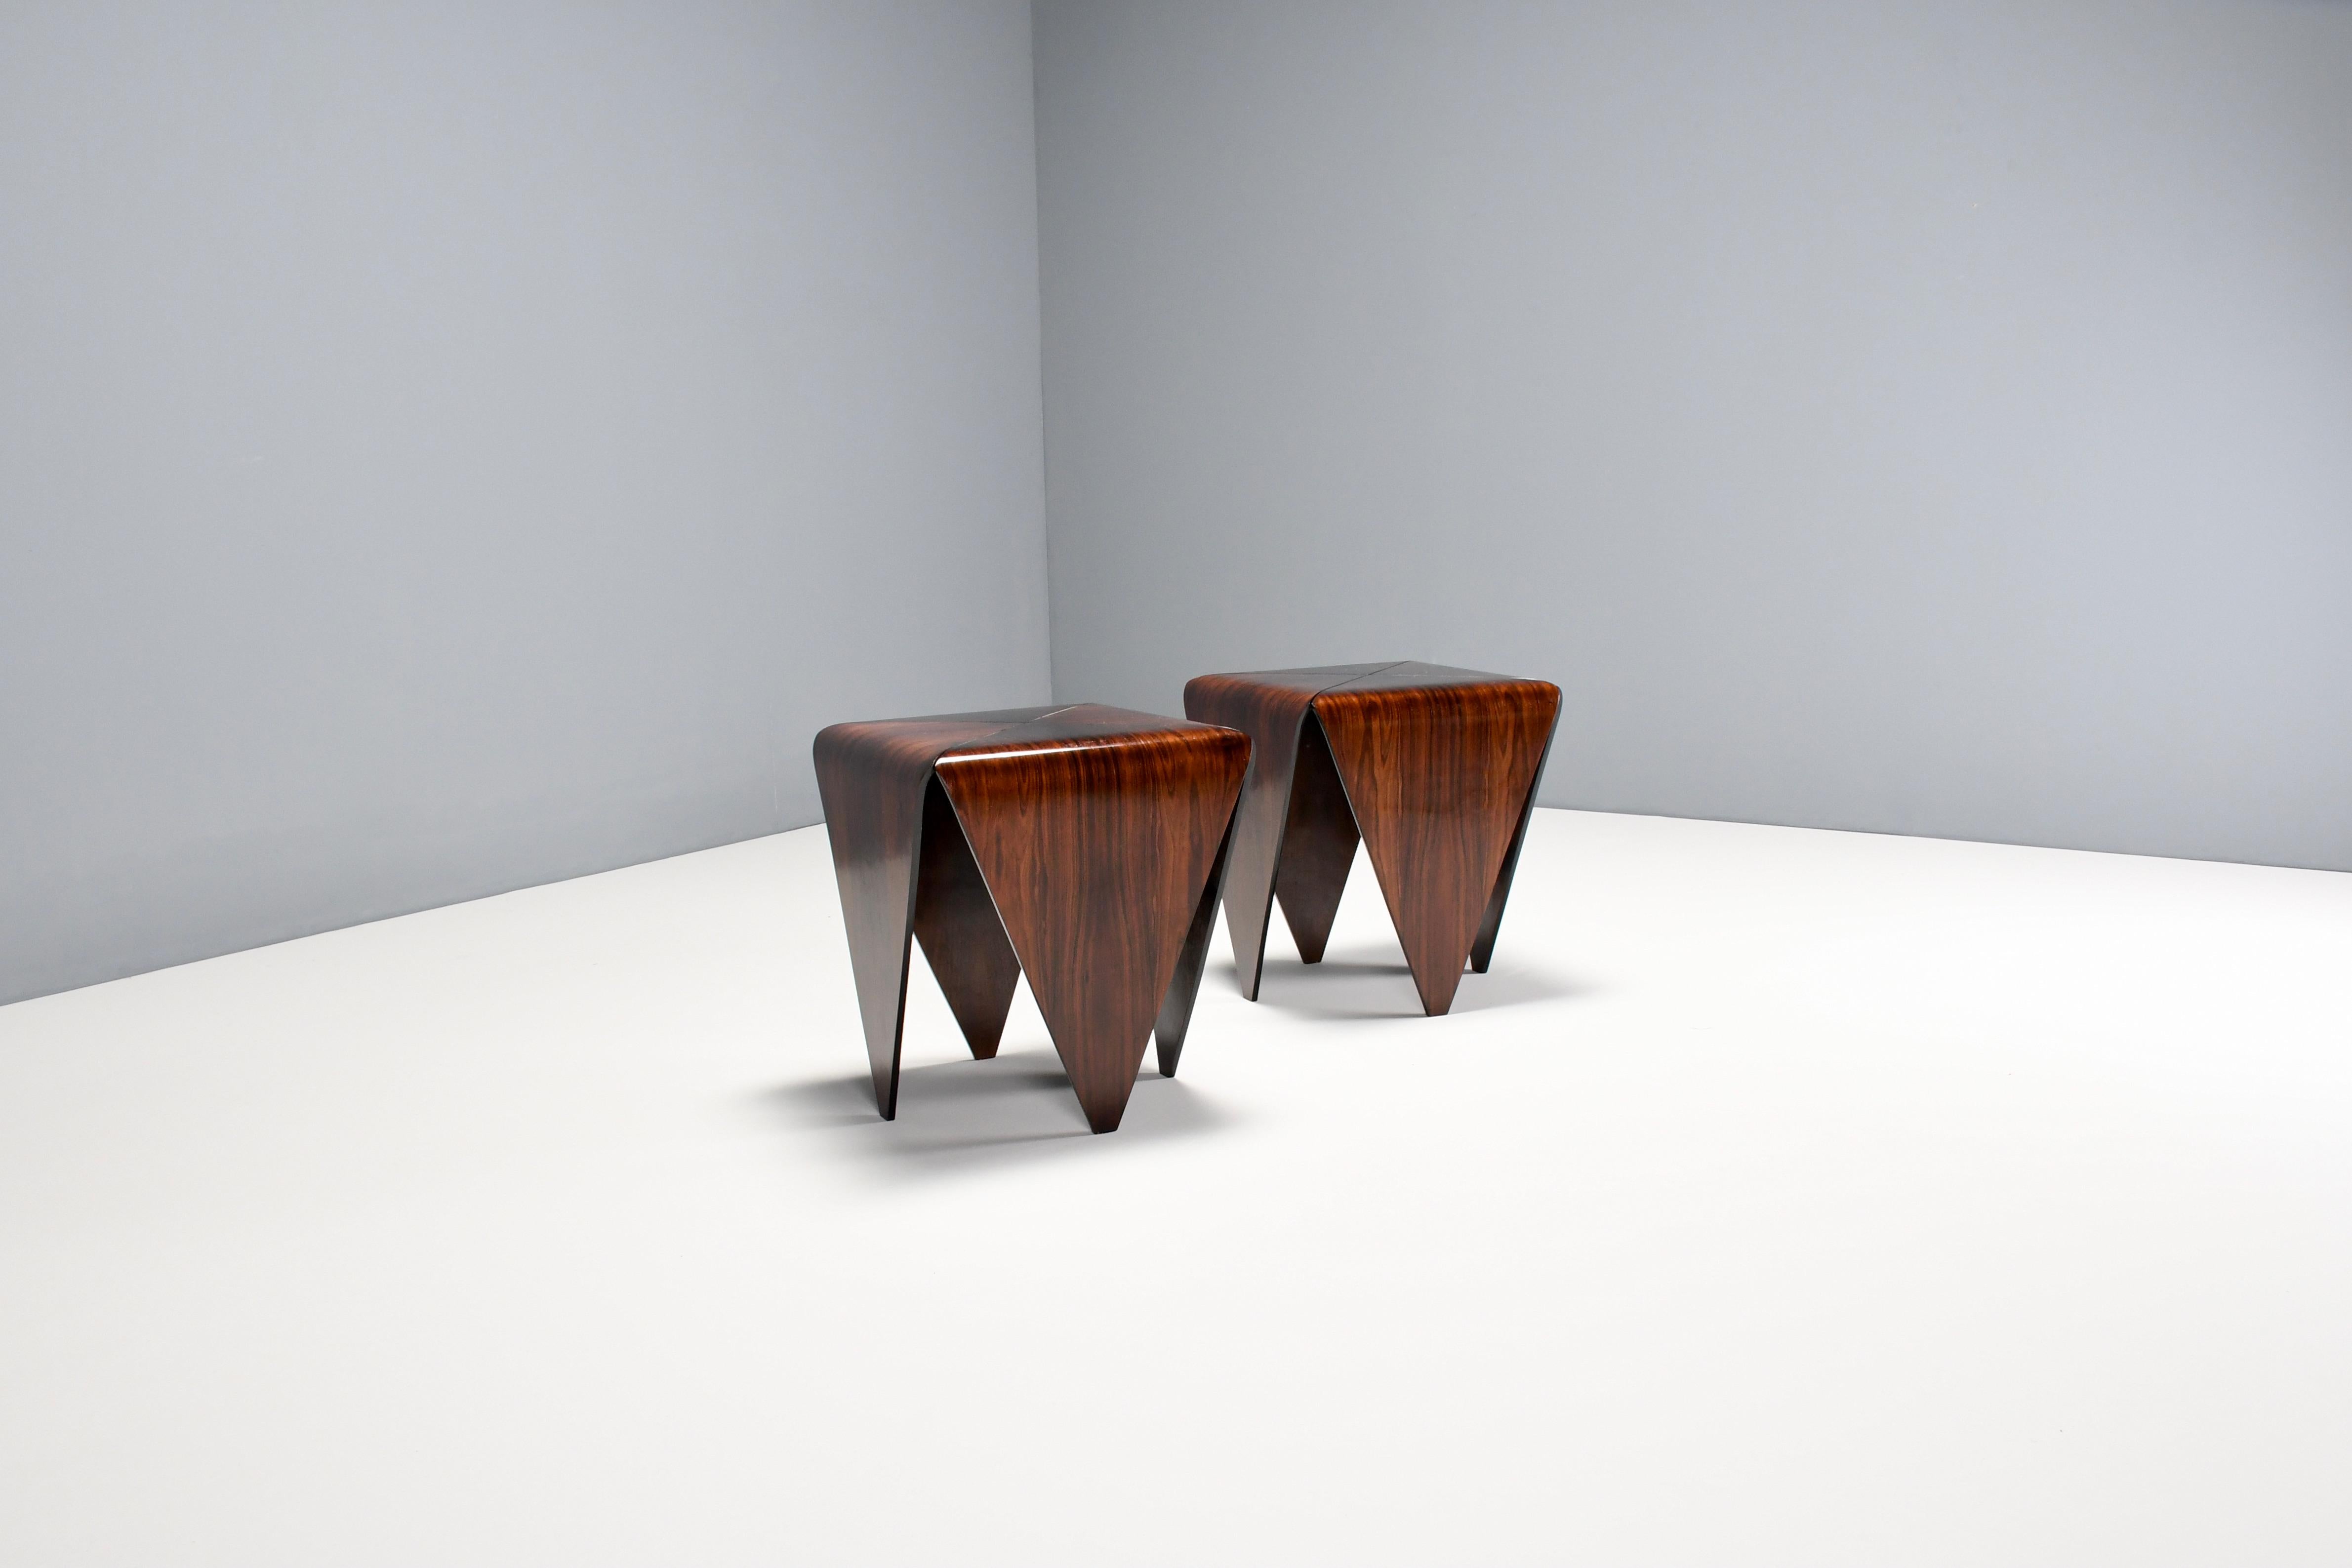 Impressive ‘Petalas’ side tables in very good condition.

Designed by Jorge Zalszupin 

Manufactured by his own company L’Atelier, Brazil, 1959

The ‘Petalas' tables are inspired by the folded paper structures used with Origami.

The tables